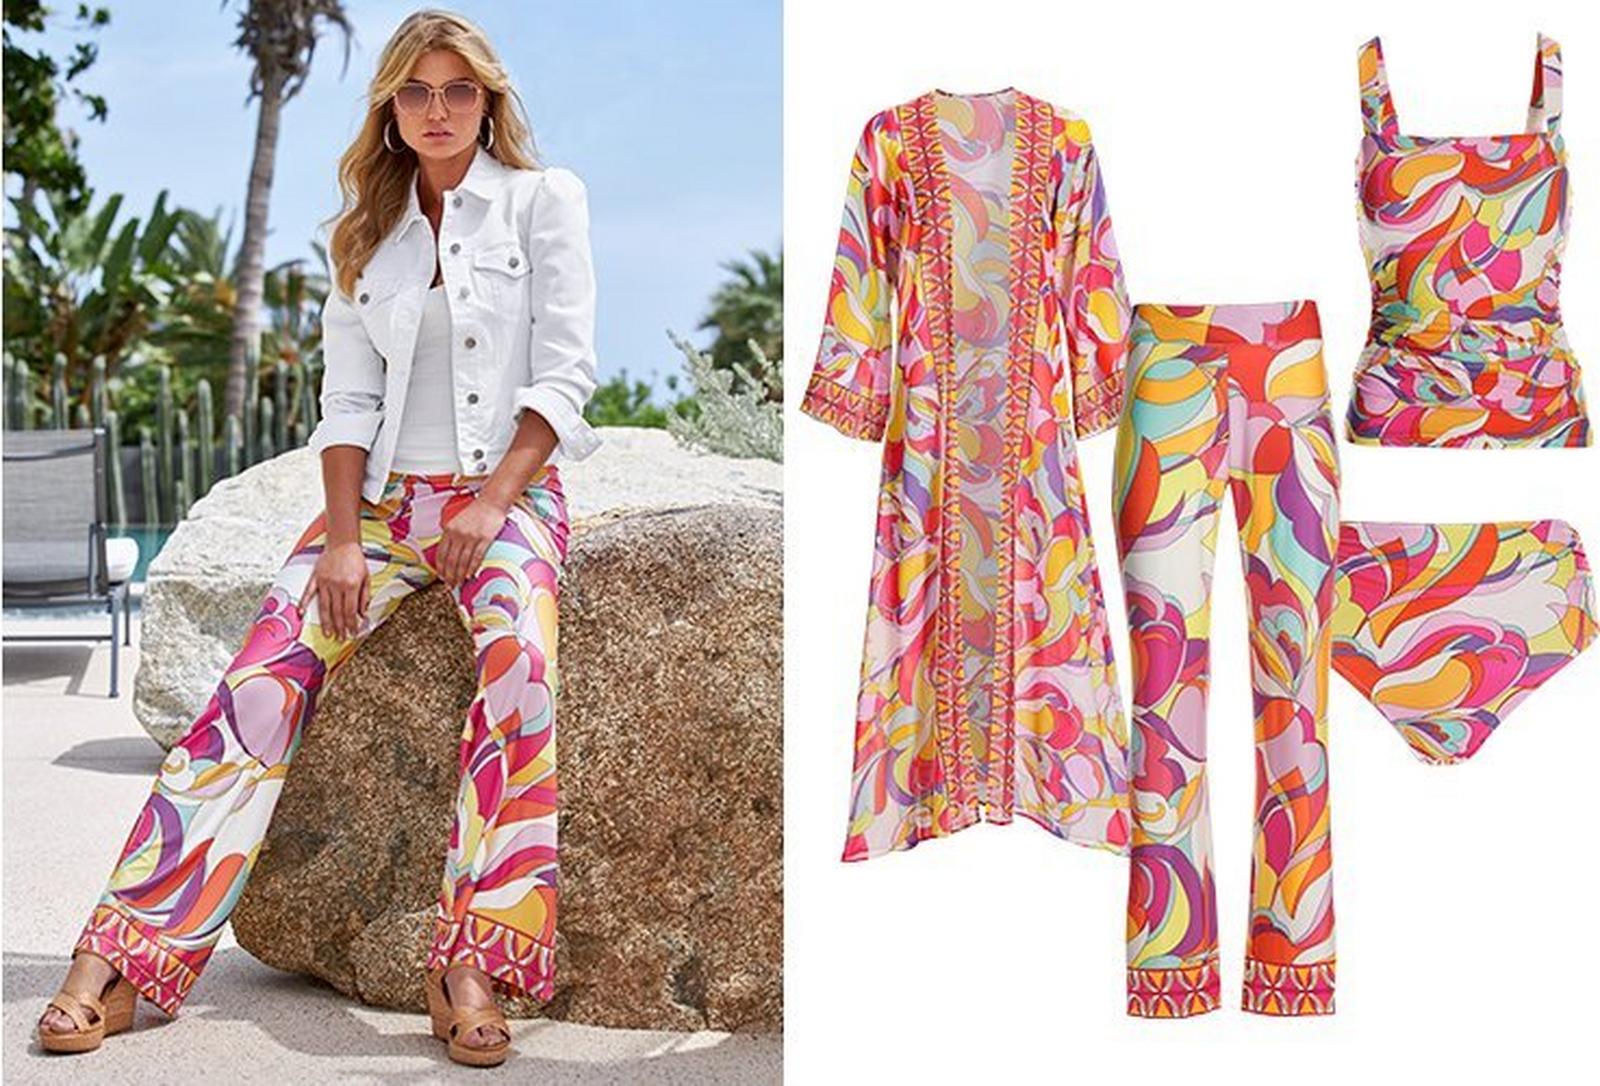 left model wearing a white denim jacket, white tank top, multicolored paisley palazzo pants, and tan wedges. right panel shows multicolored paisley print duster, palazzo pants, square-neck tankini top, and bottoms.